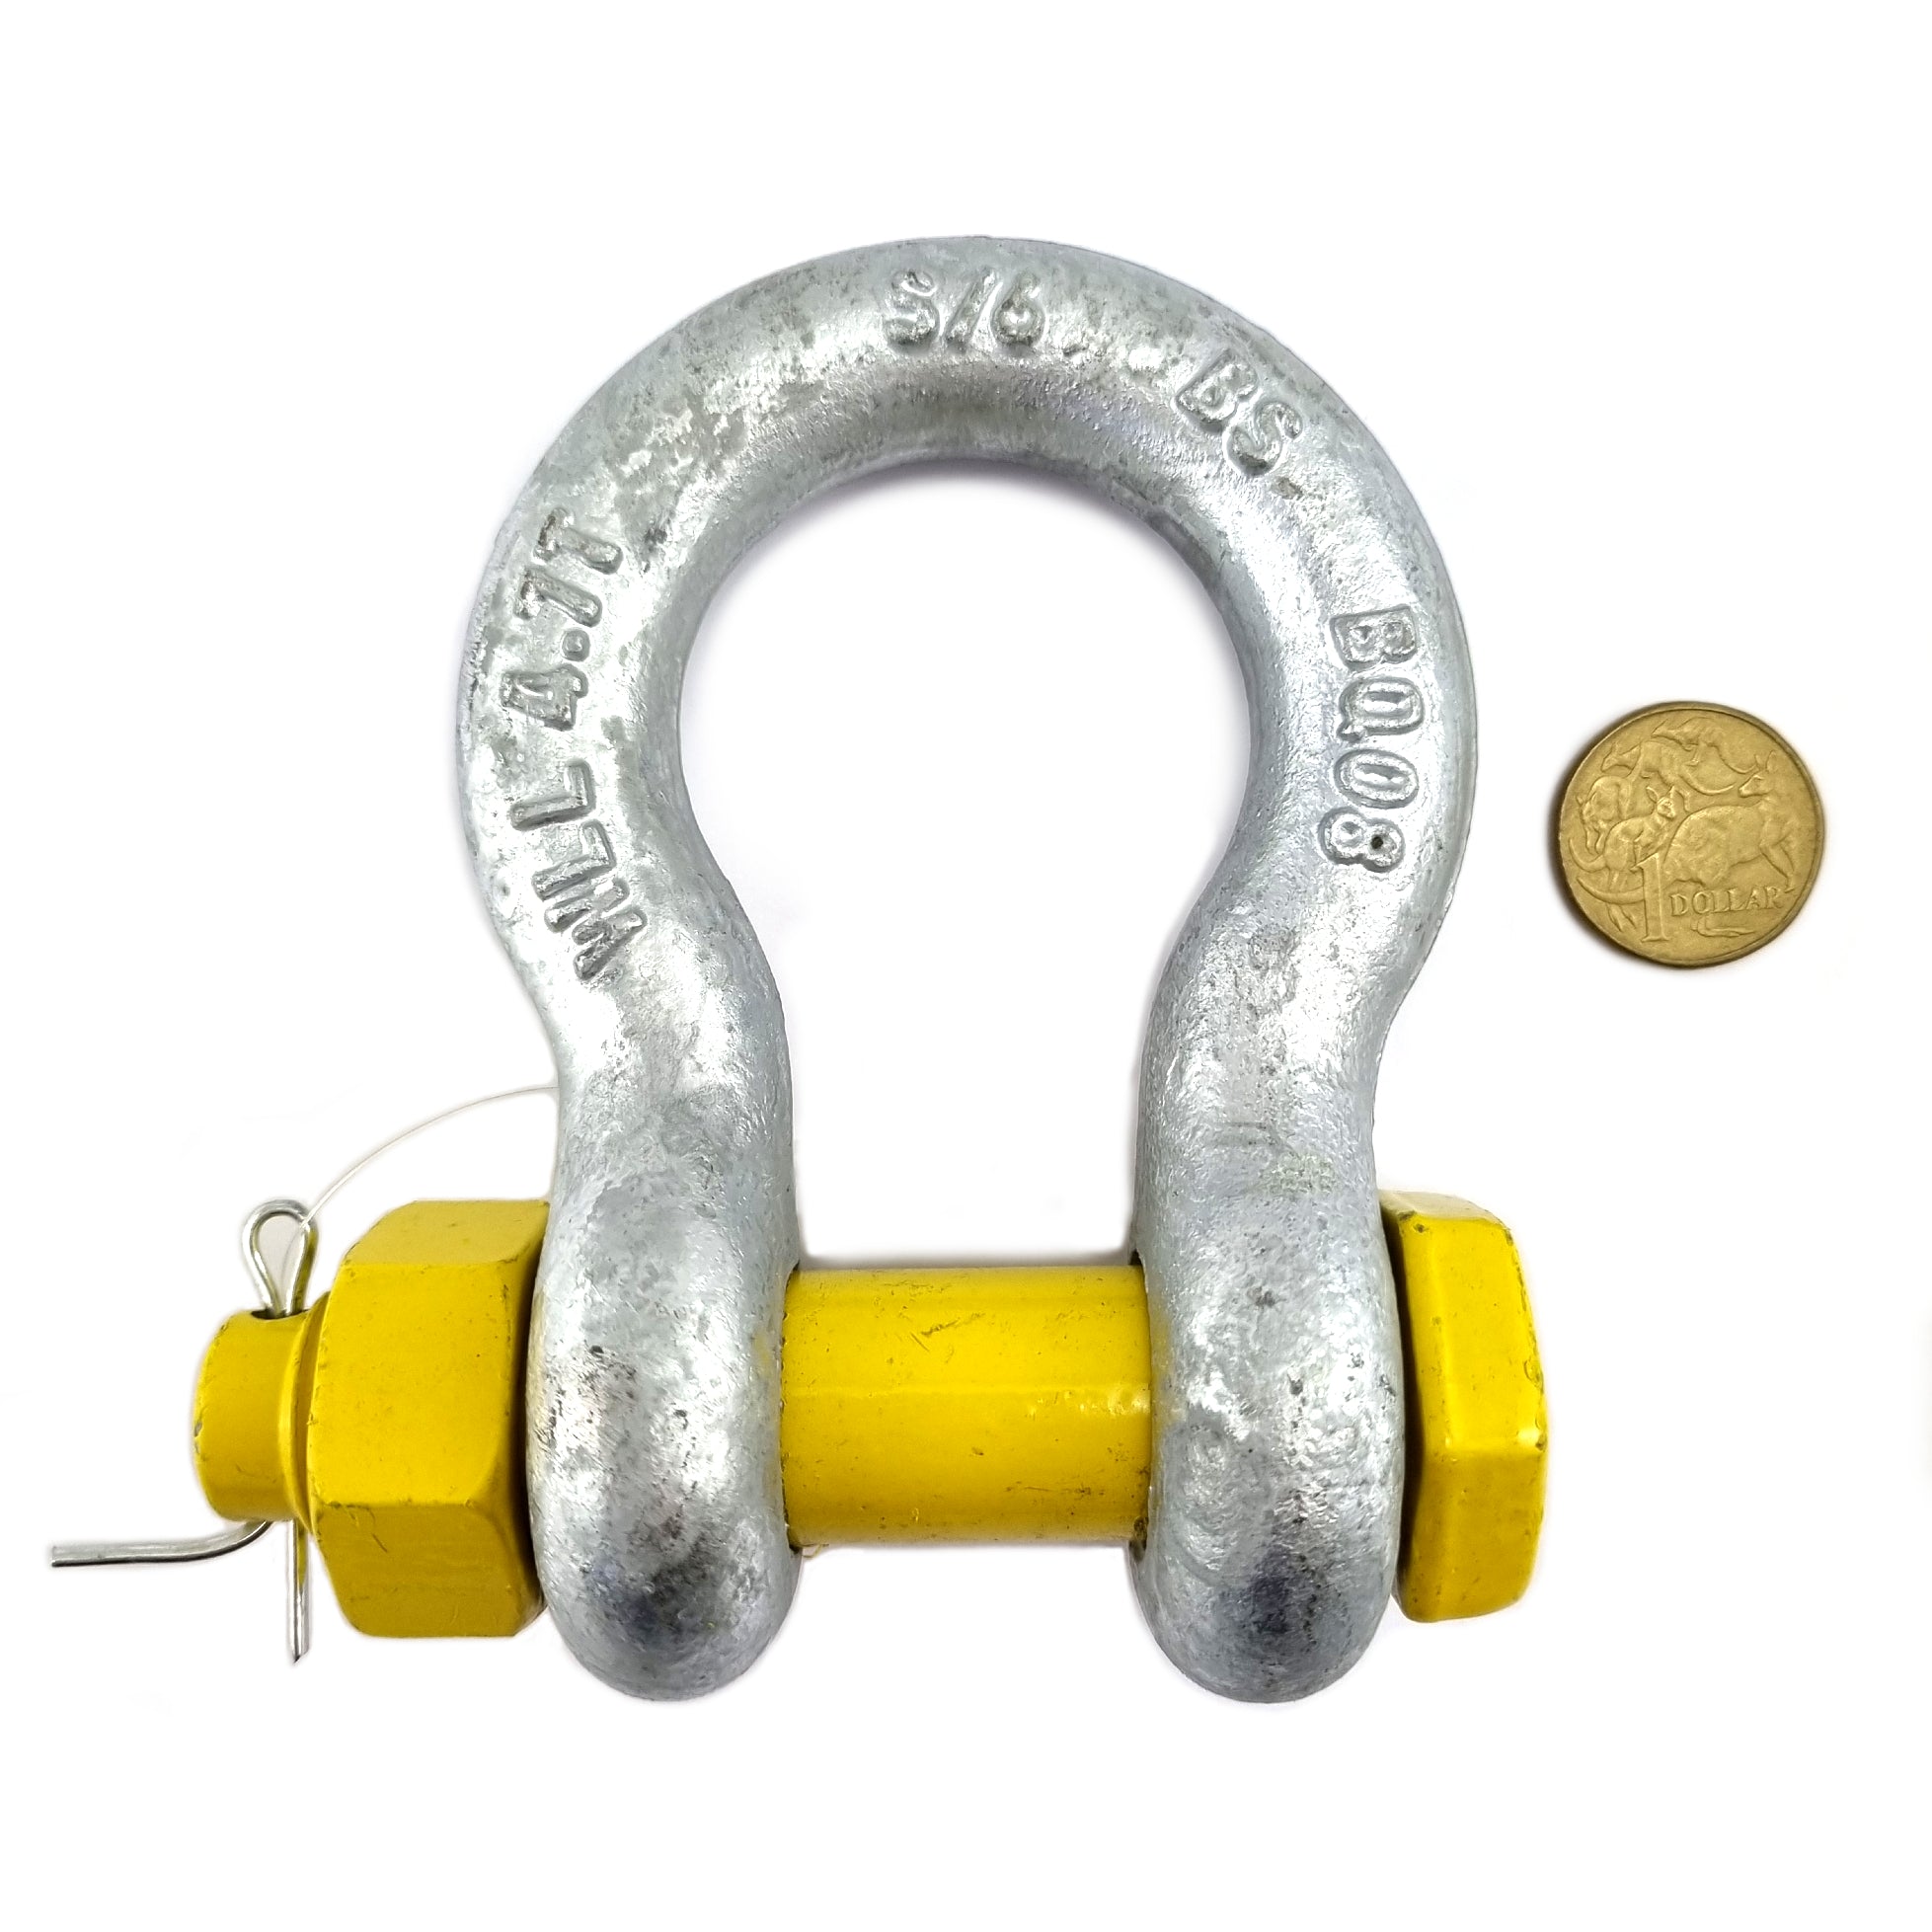 4.7 Tonne galvanised bow shackle, grade S, complies with AS 2741. Shop hardware chain.com.au